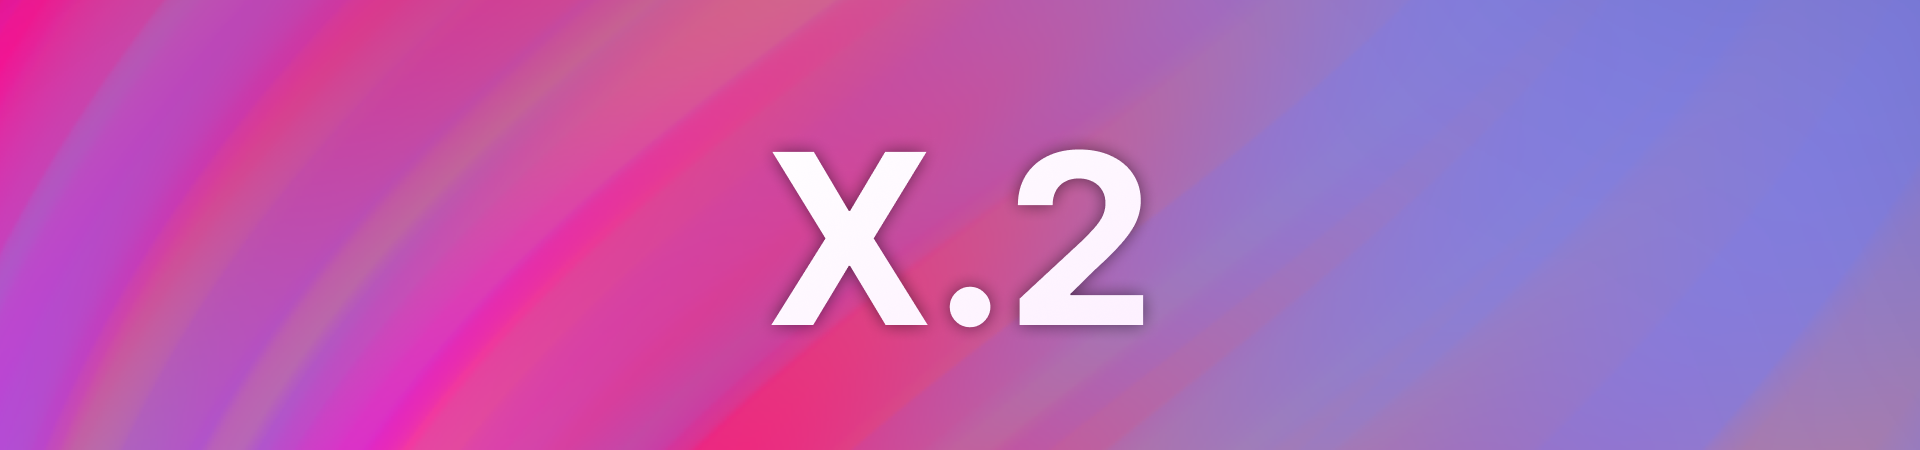 Gradient background with 'X.2' text